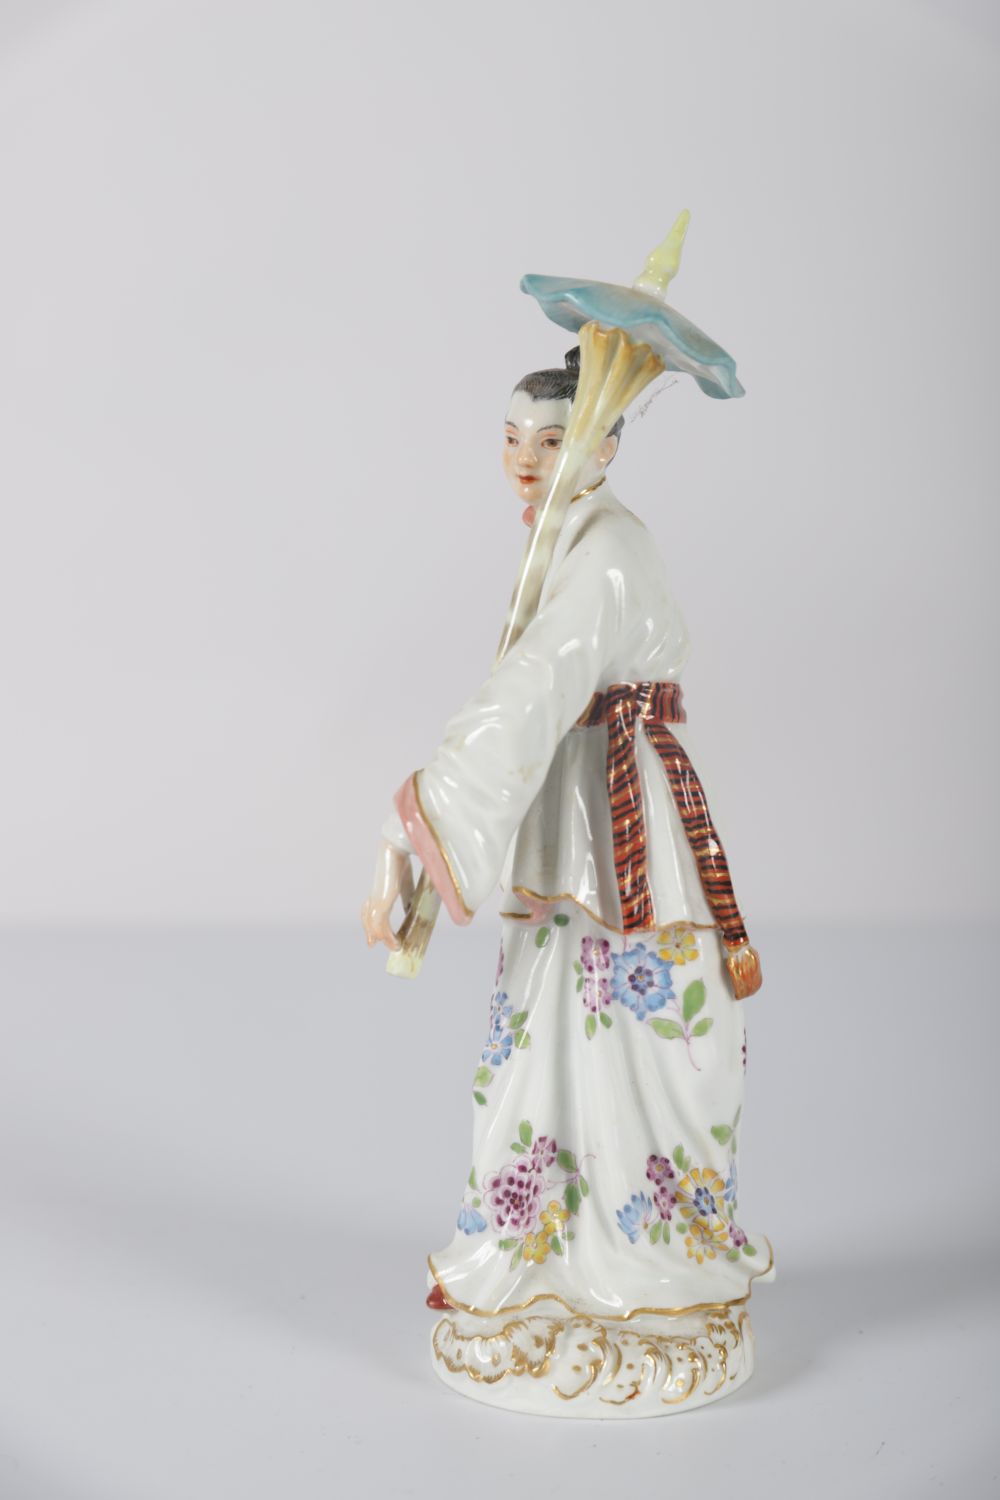 MEISSEN FIGURE OF A MAIDEN WITH PARASOL - Image 3 of 3